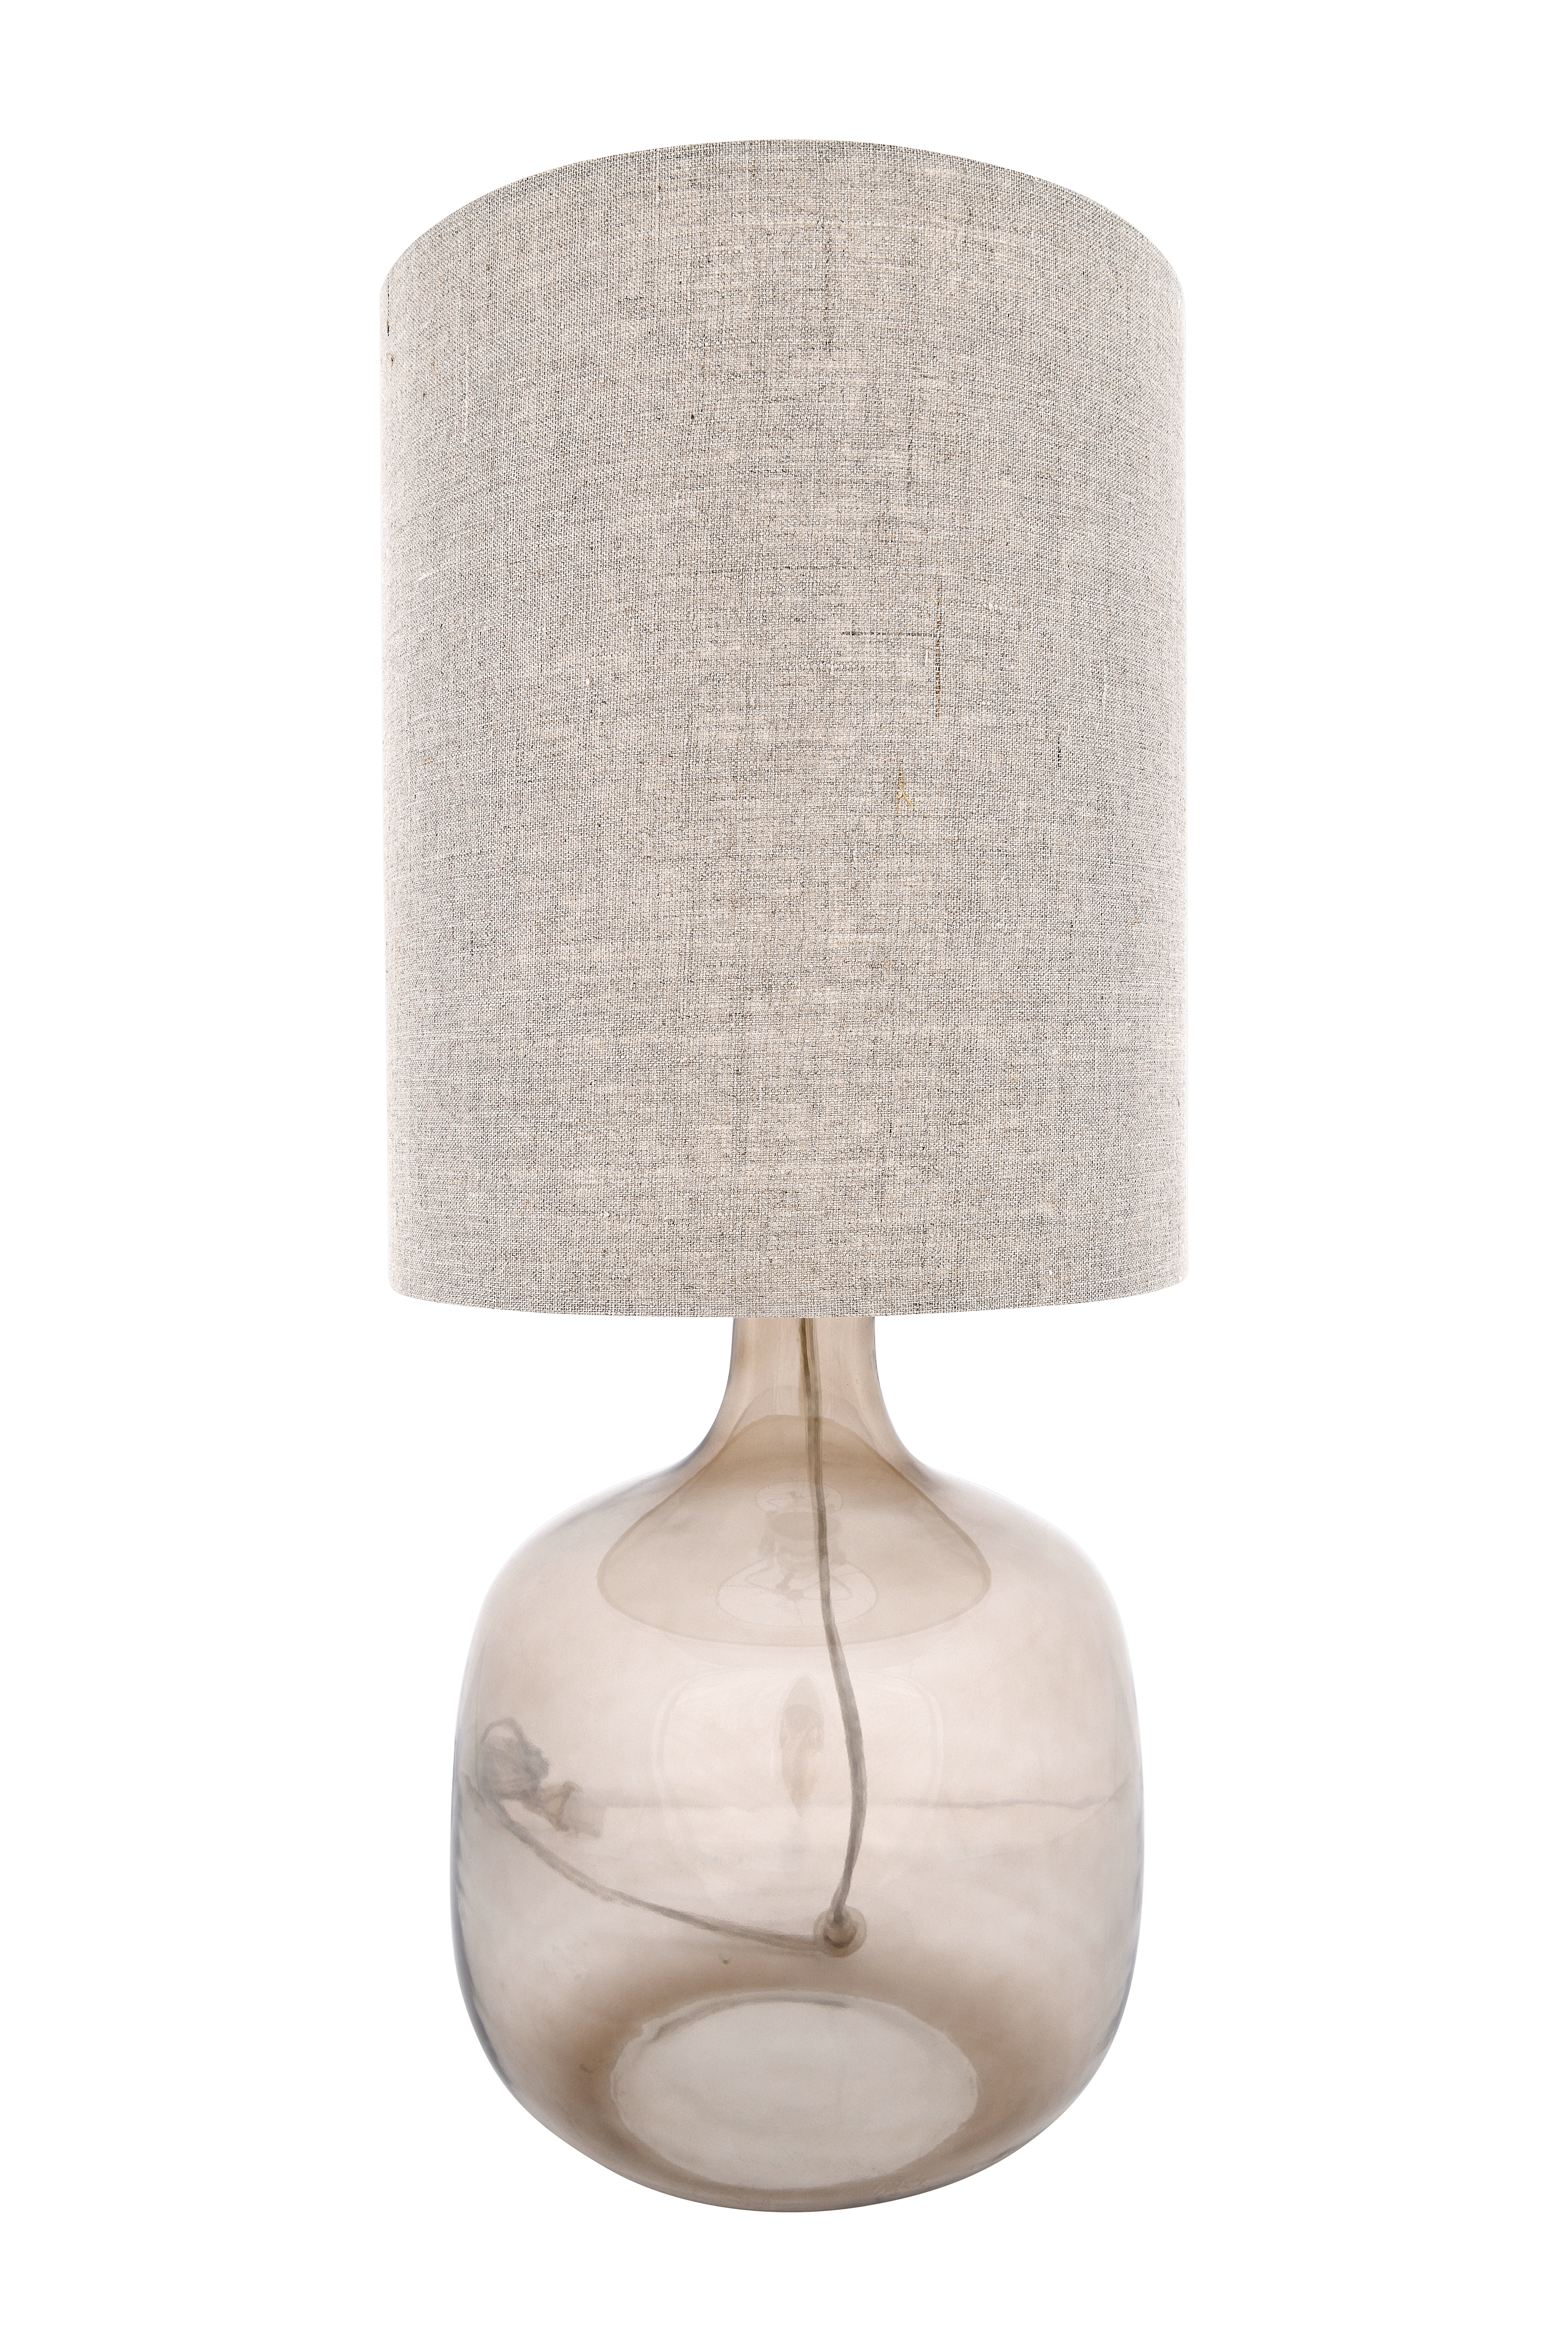 Transparent Glass Table Lamp with Cotton Shade - Image 0